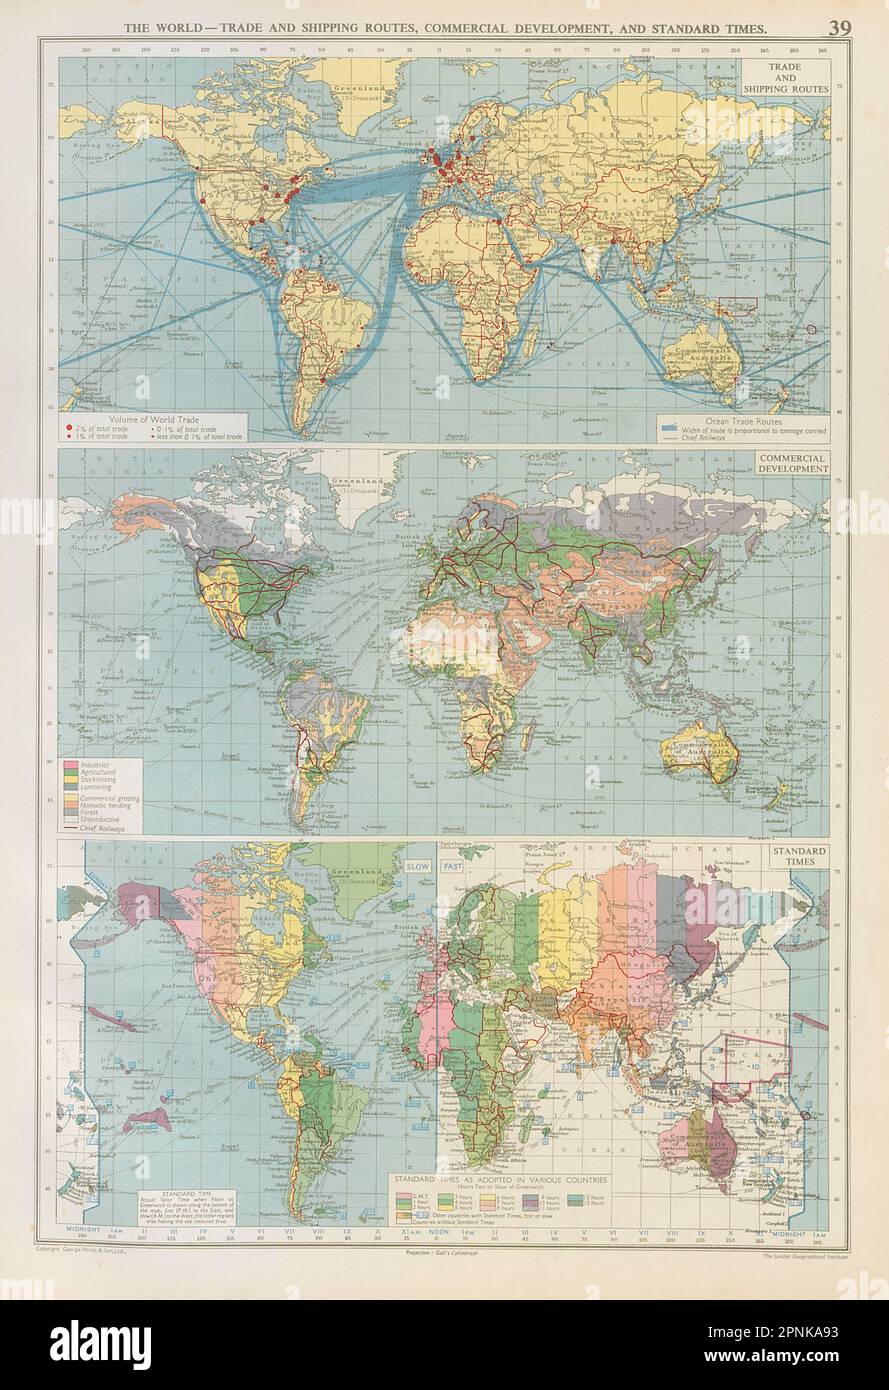 World - Trade & Shipping Routes, Commercial Development. Standard Times 1952 map Stock Photo